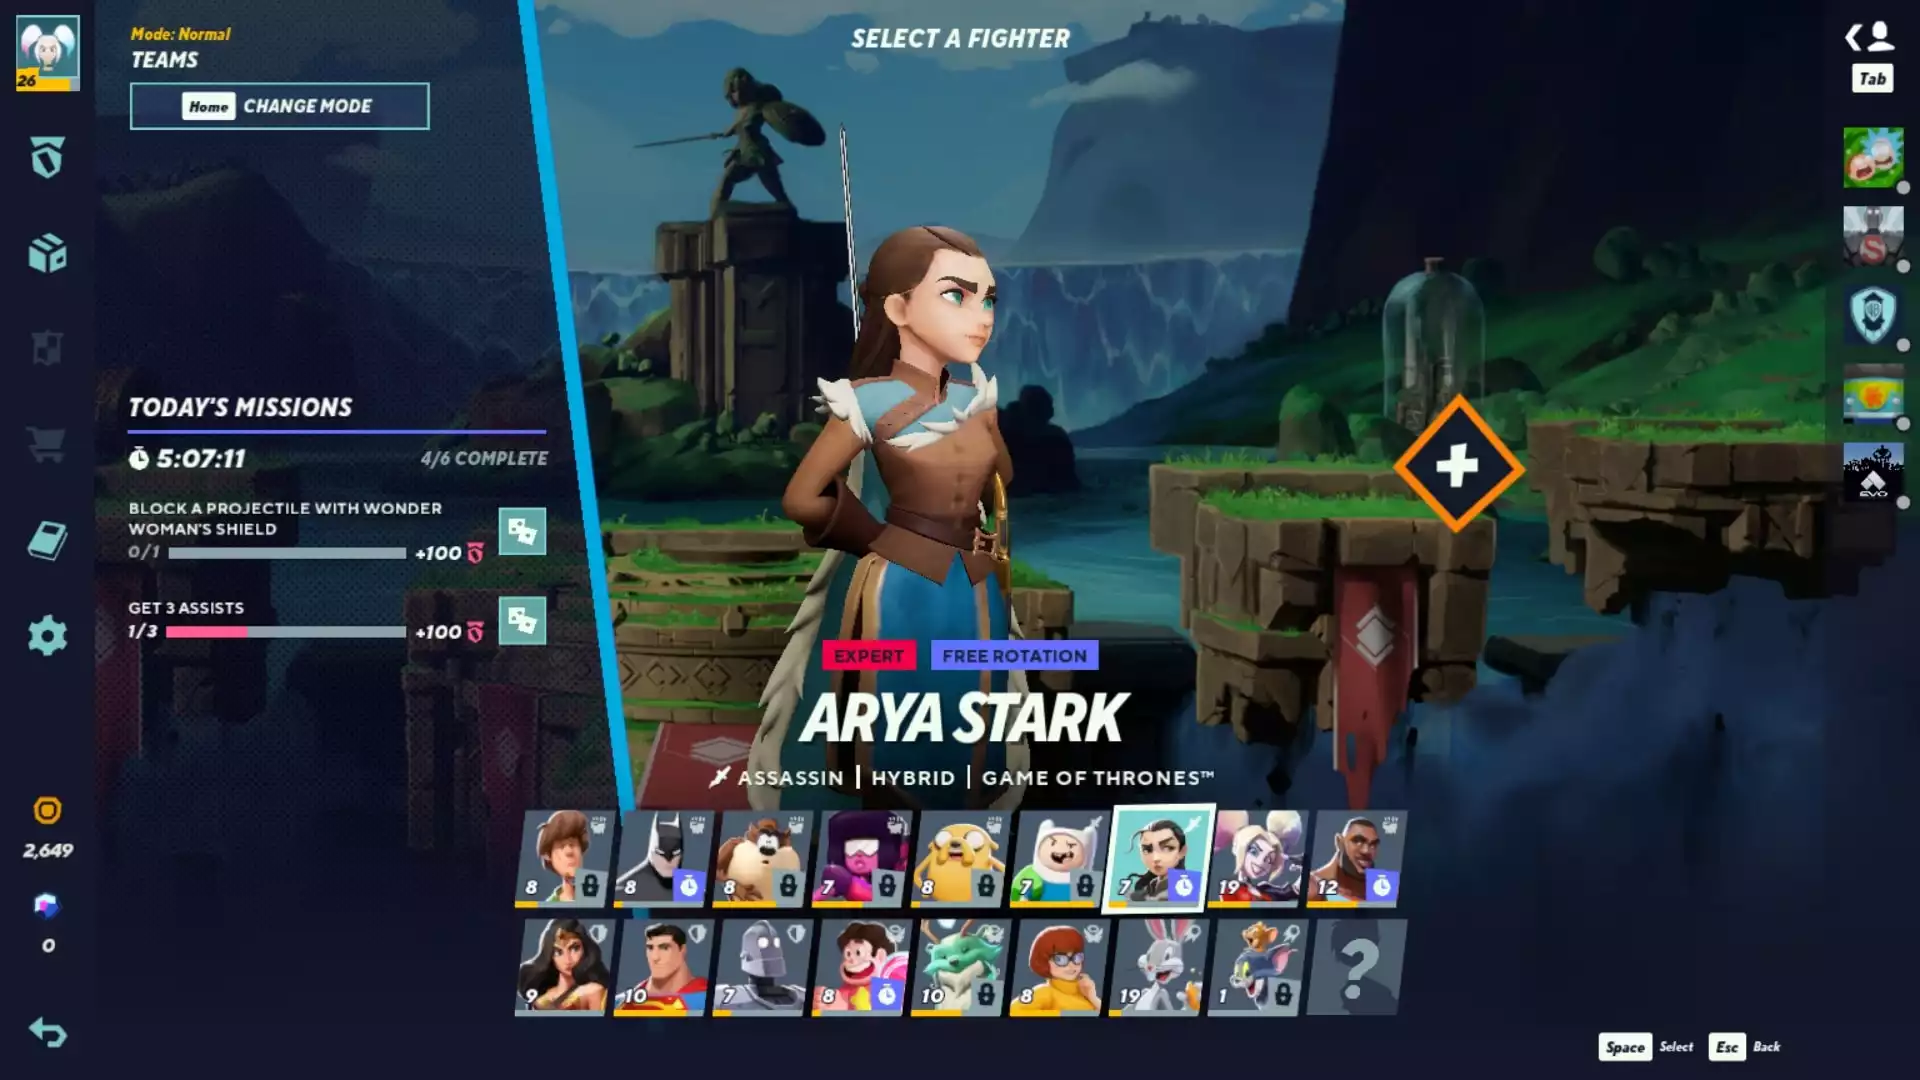 MultiVersus Arya Stark Guide: Combos, Perks, Specials, And More